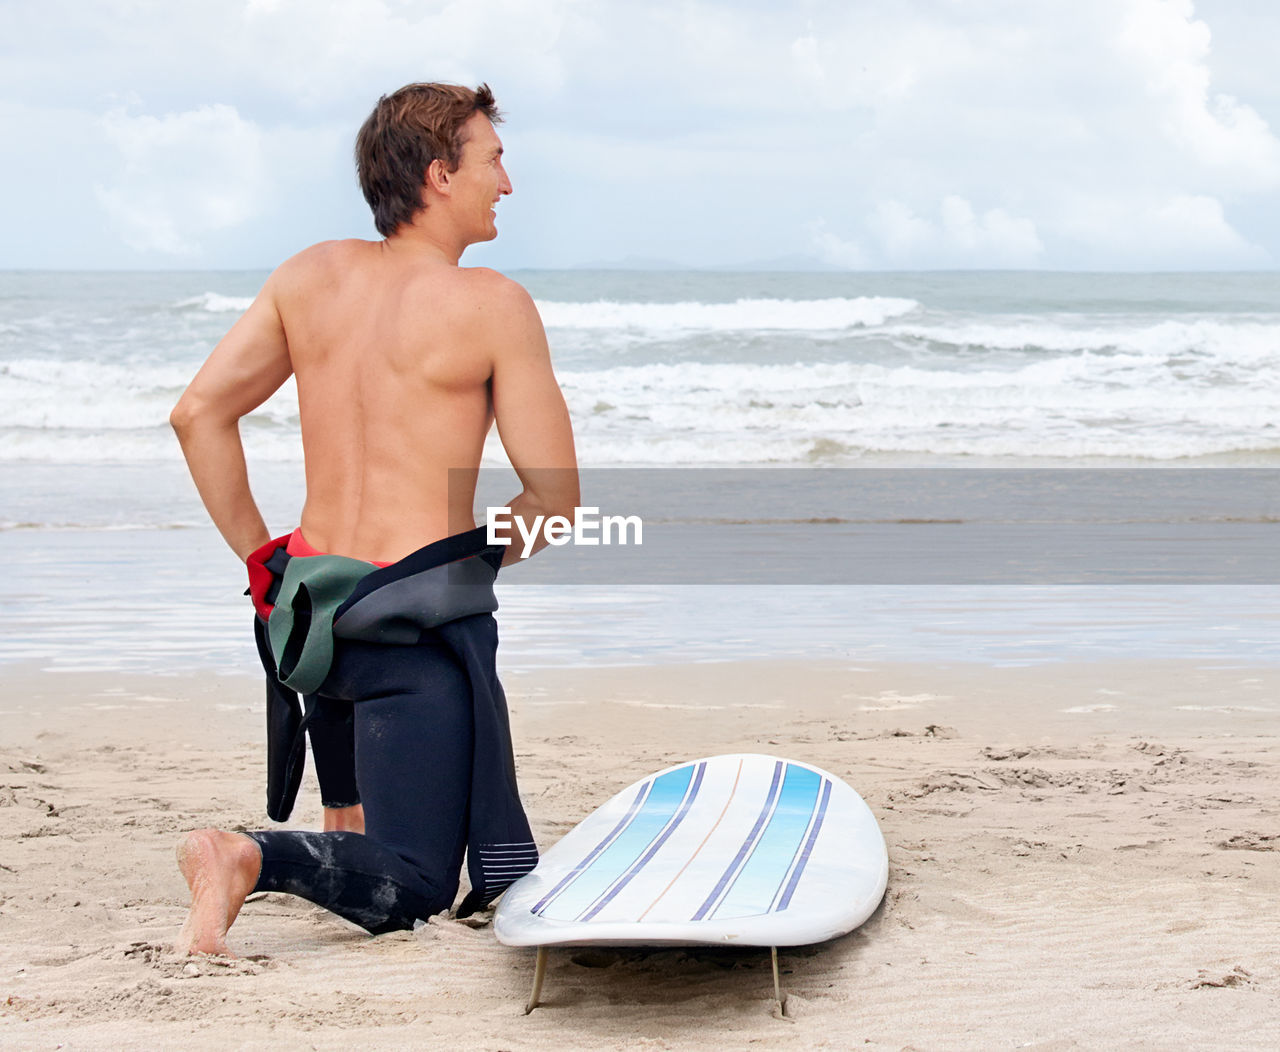 beach, land, sea, water, surfing, surfing equipment, surfboard, one person, men, adult, nature, sports, vacation, holiday, sand, trip, sky, leisure activity, water sports, lifestyles, motion, day, summer, full length, sports equipment, relaxation, standing, cloud, clothing, young adult, travel, person, outdoors, horizon over water, looking, swimwear, exercising, horizon, wetsuit, rear view, wave, beauty in nature, body of water, travel destinations, swimming trunks